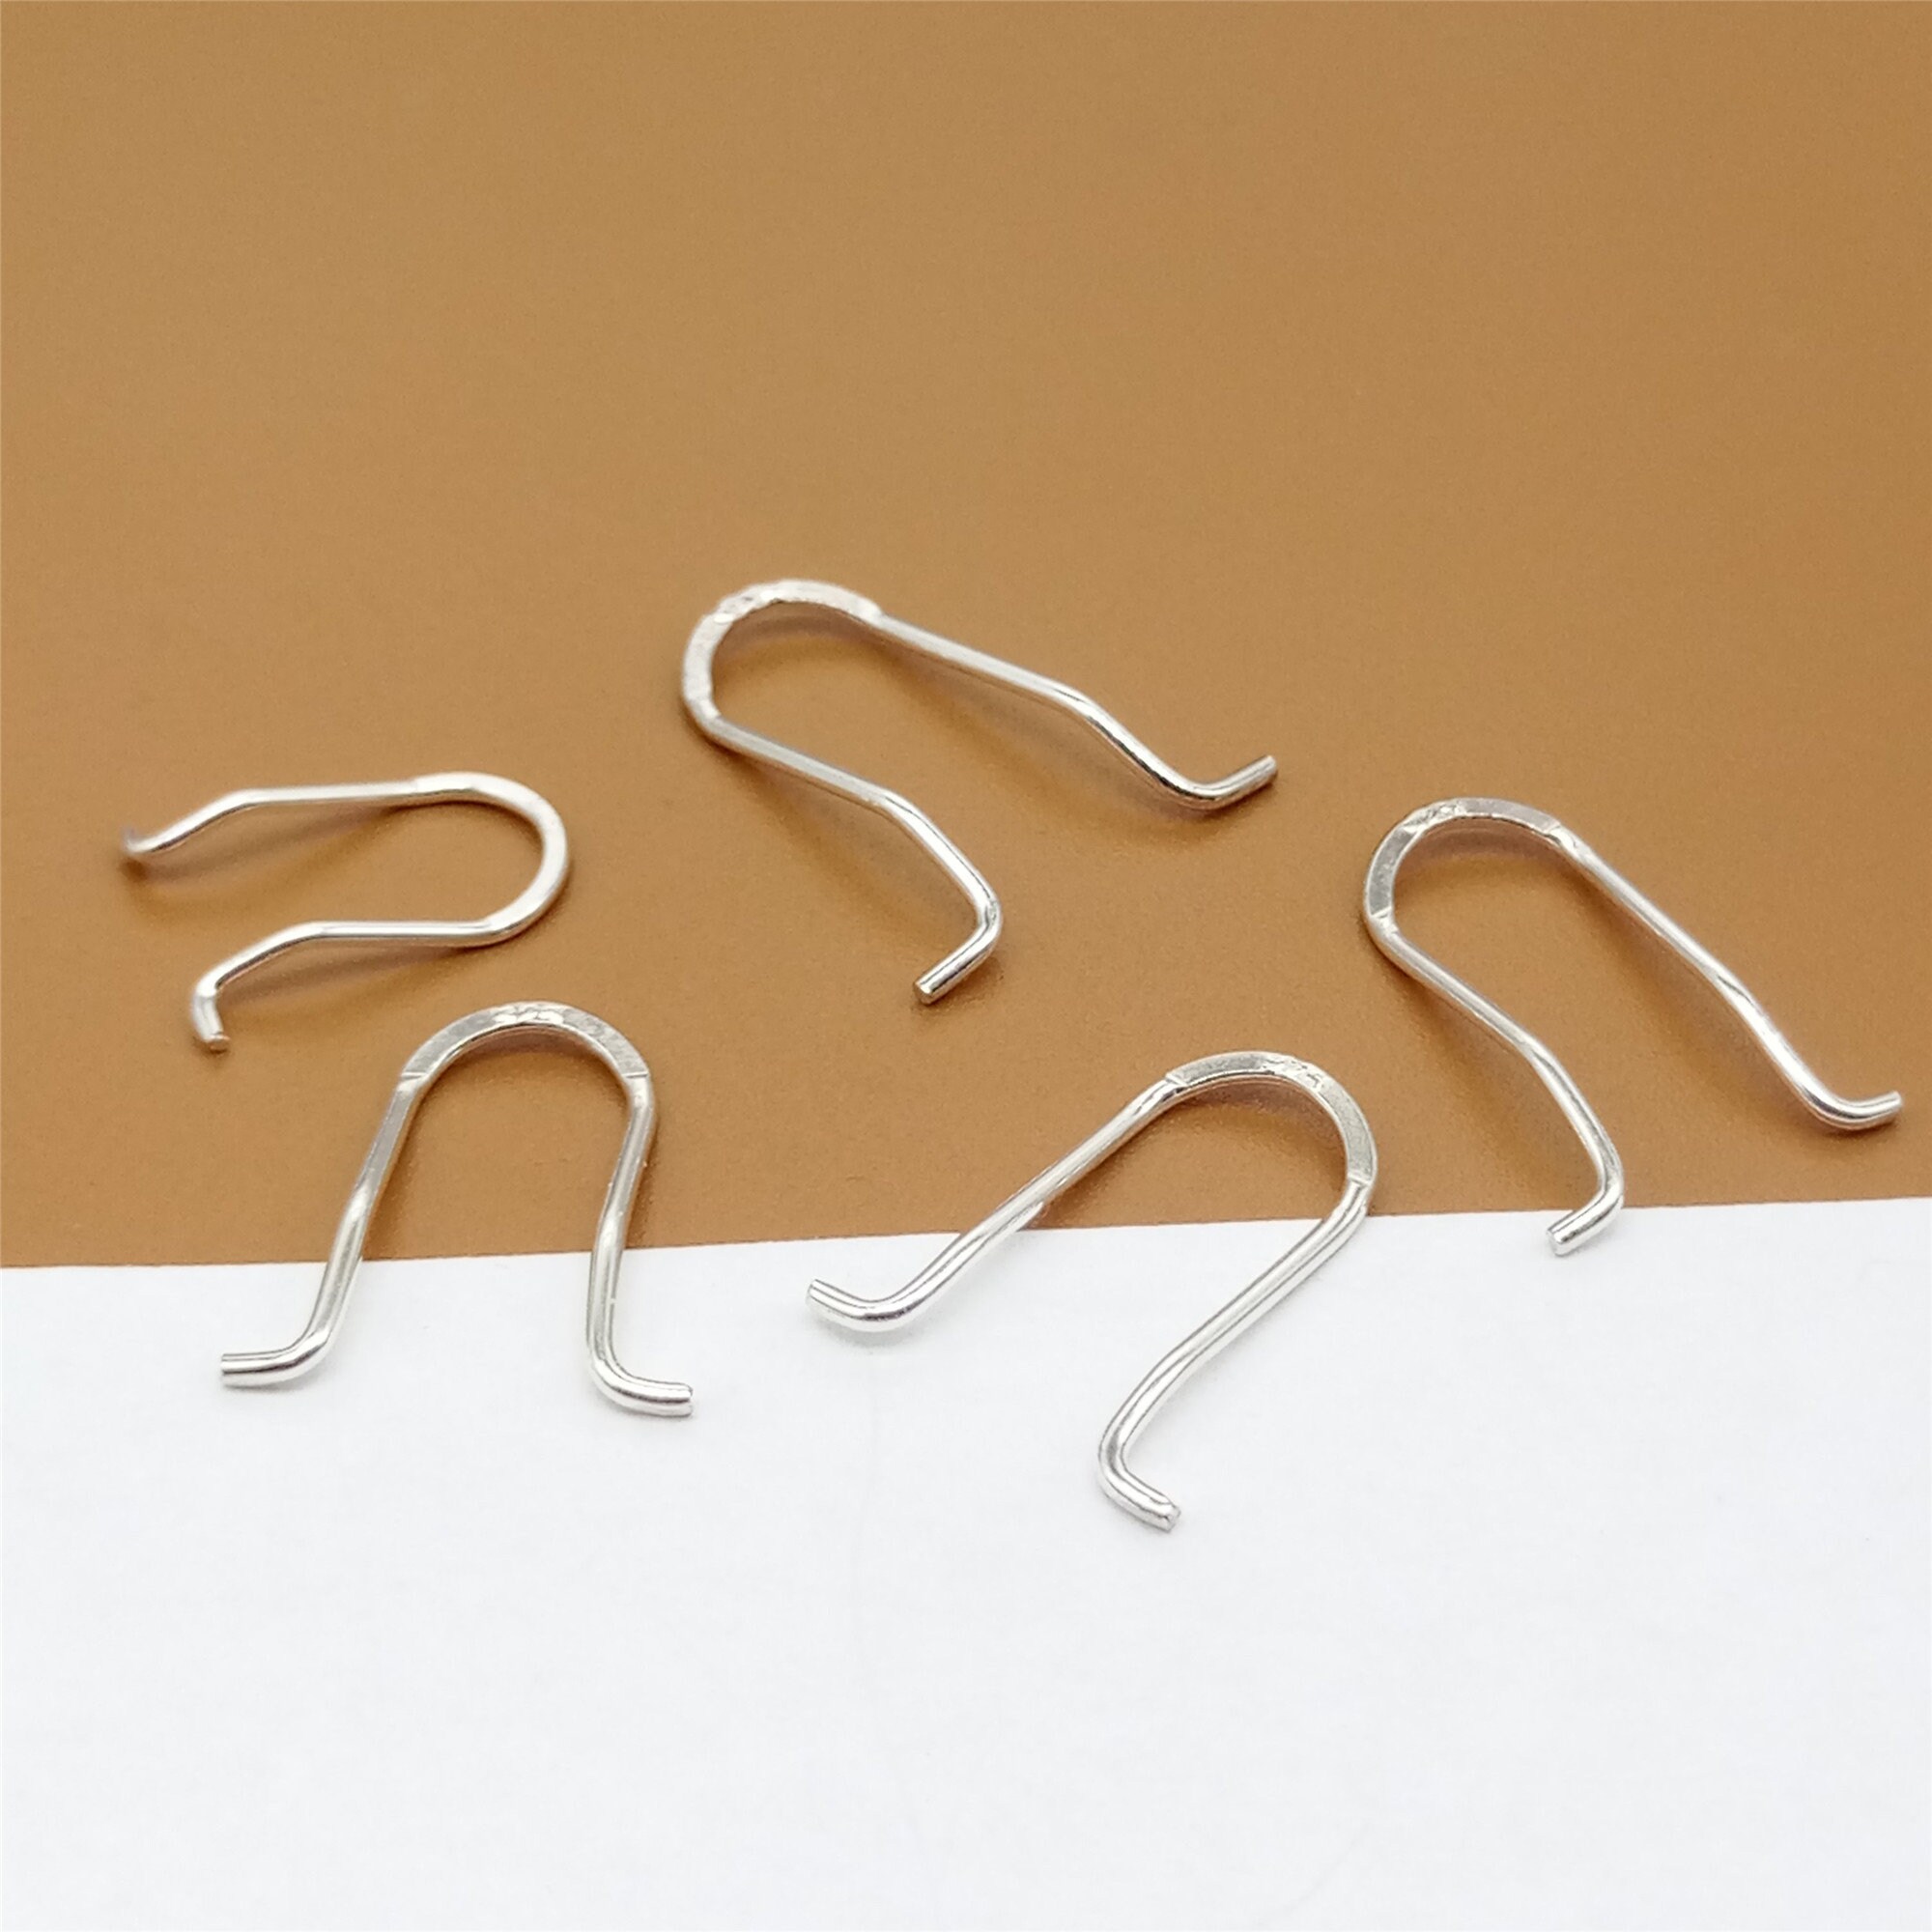 4 Pairs of 925 Sterling Silver Earring Hooks w/ Box Chain Threader -  AliExpress